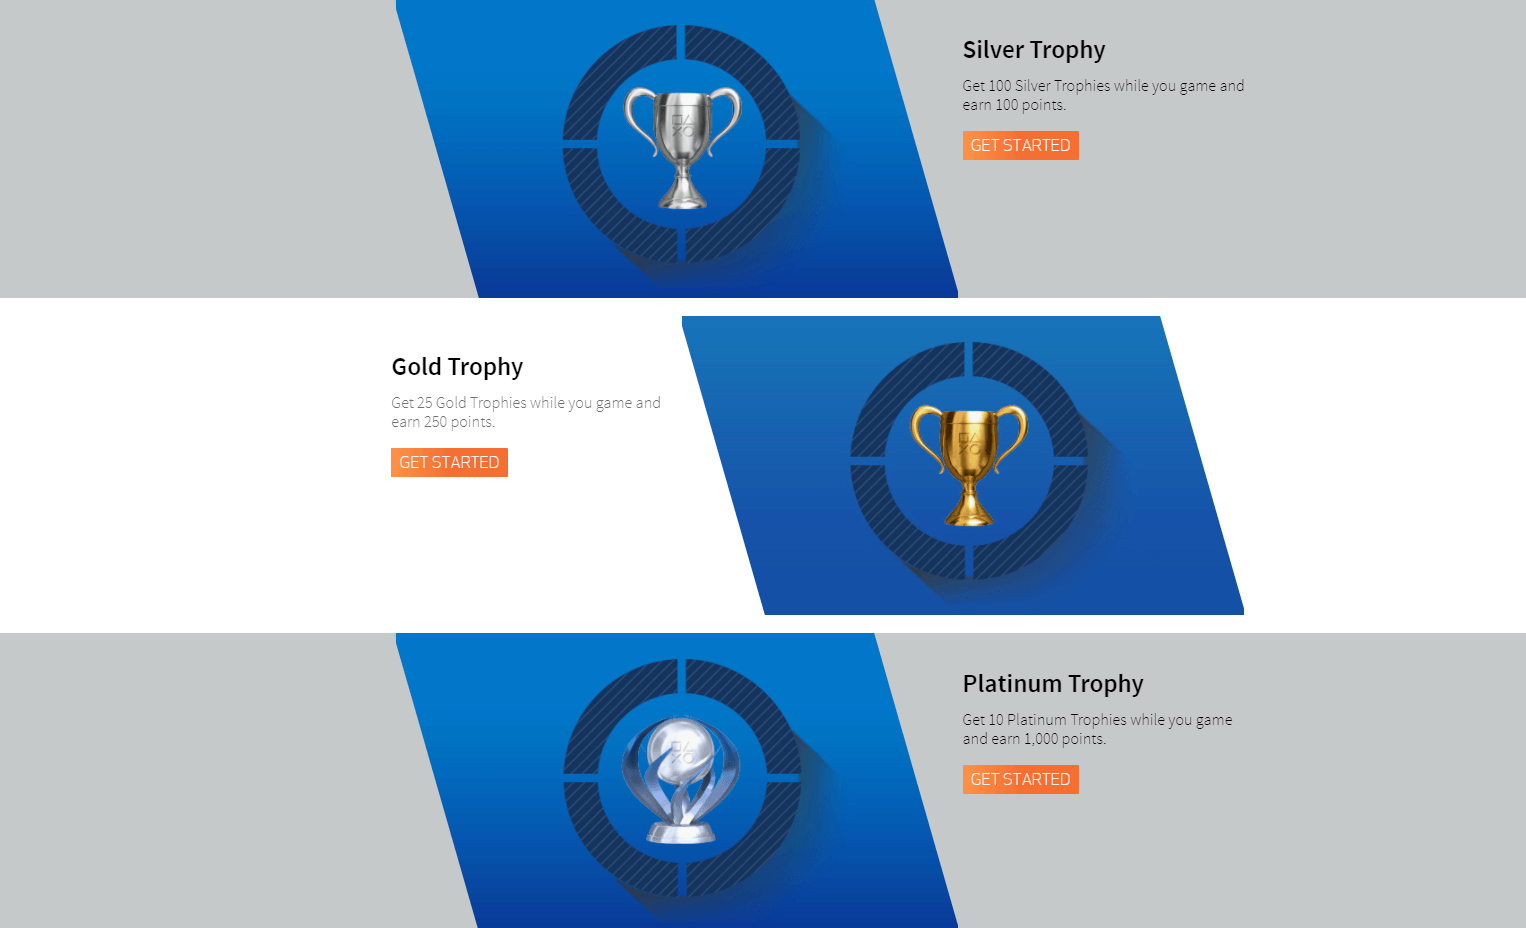 PlayStation Trophies Can Now Earn You A Very Small Amount Of Money